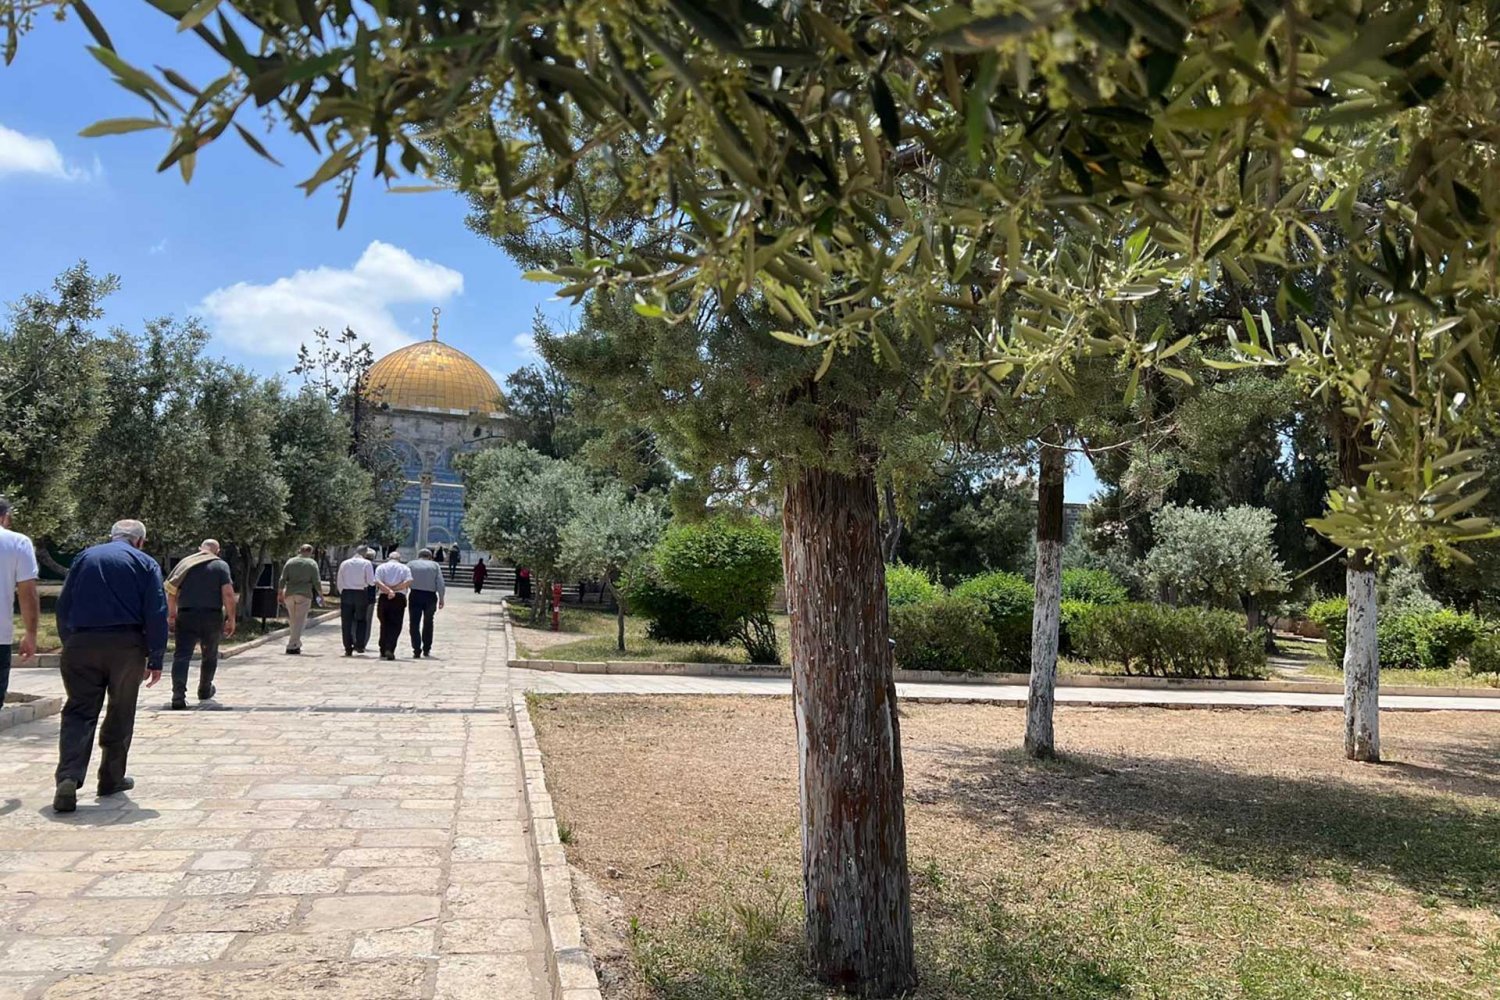 Strolling on the tree-lined grounds of Jerusalem’s Noble Sanctuary